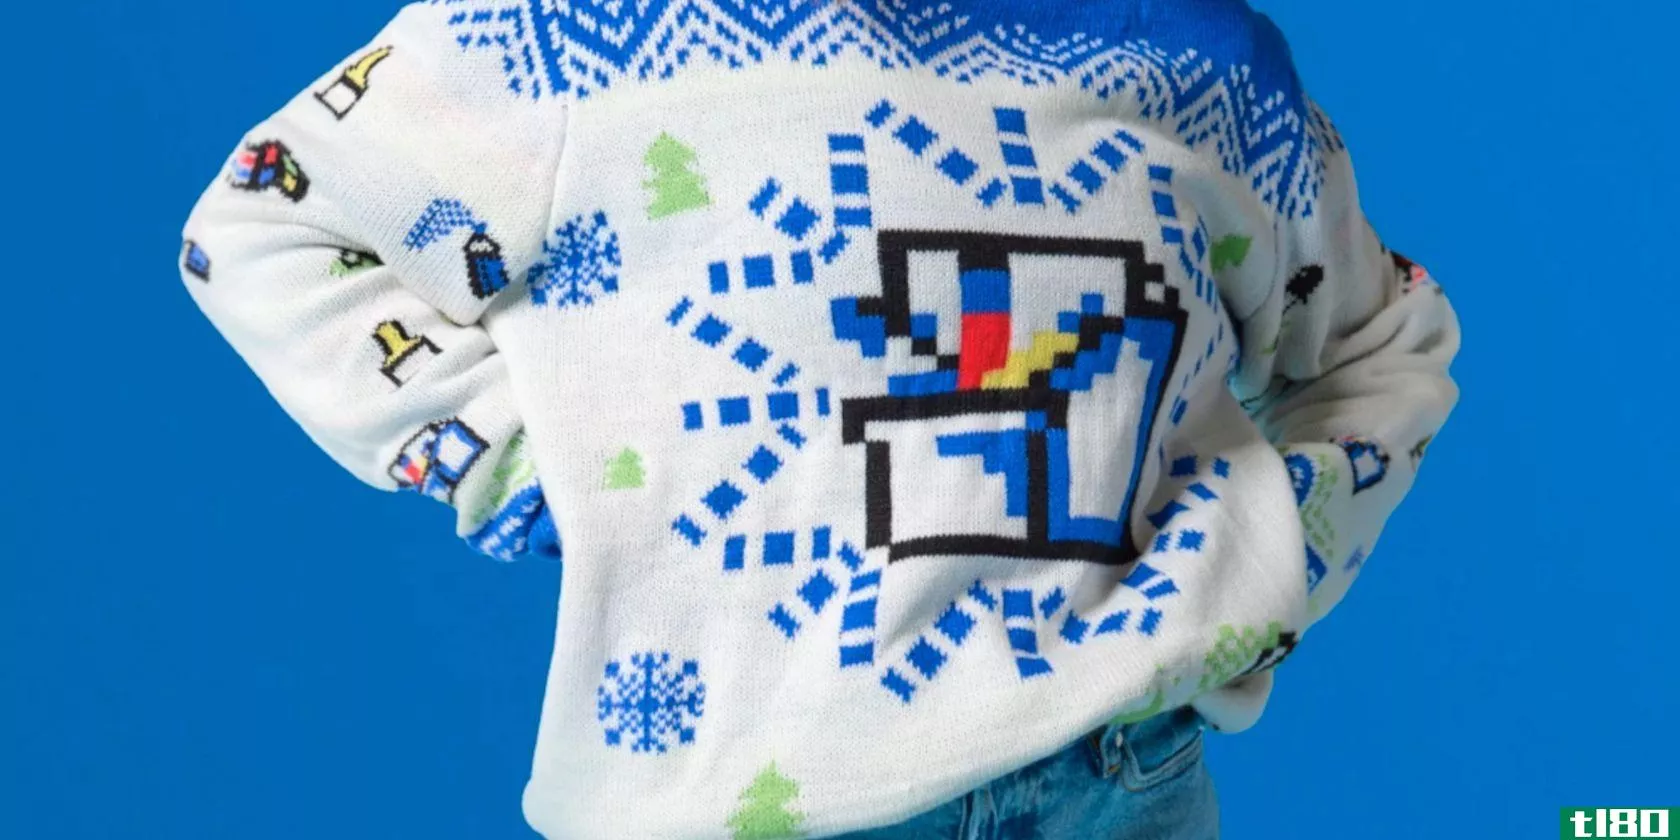 A lady wearing a Windows Ugly Sweater